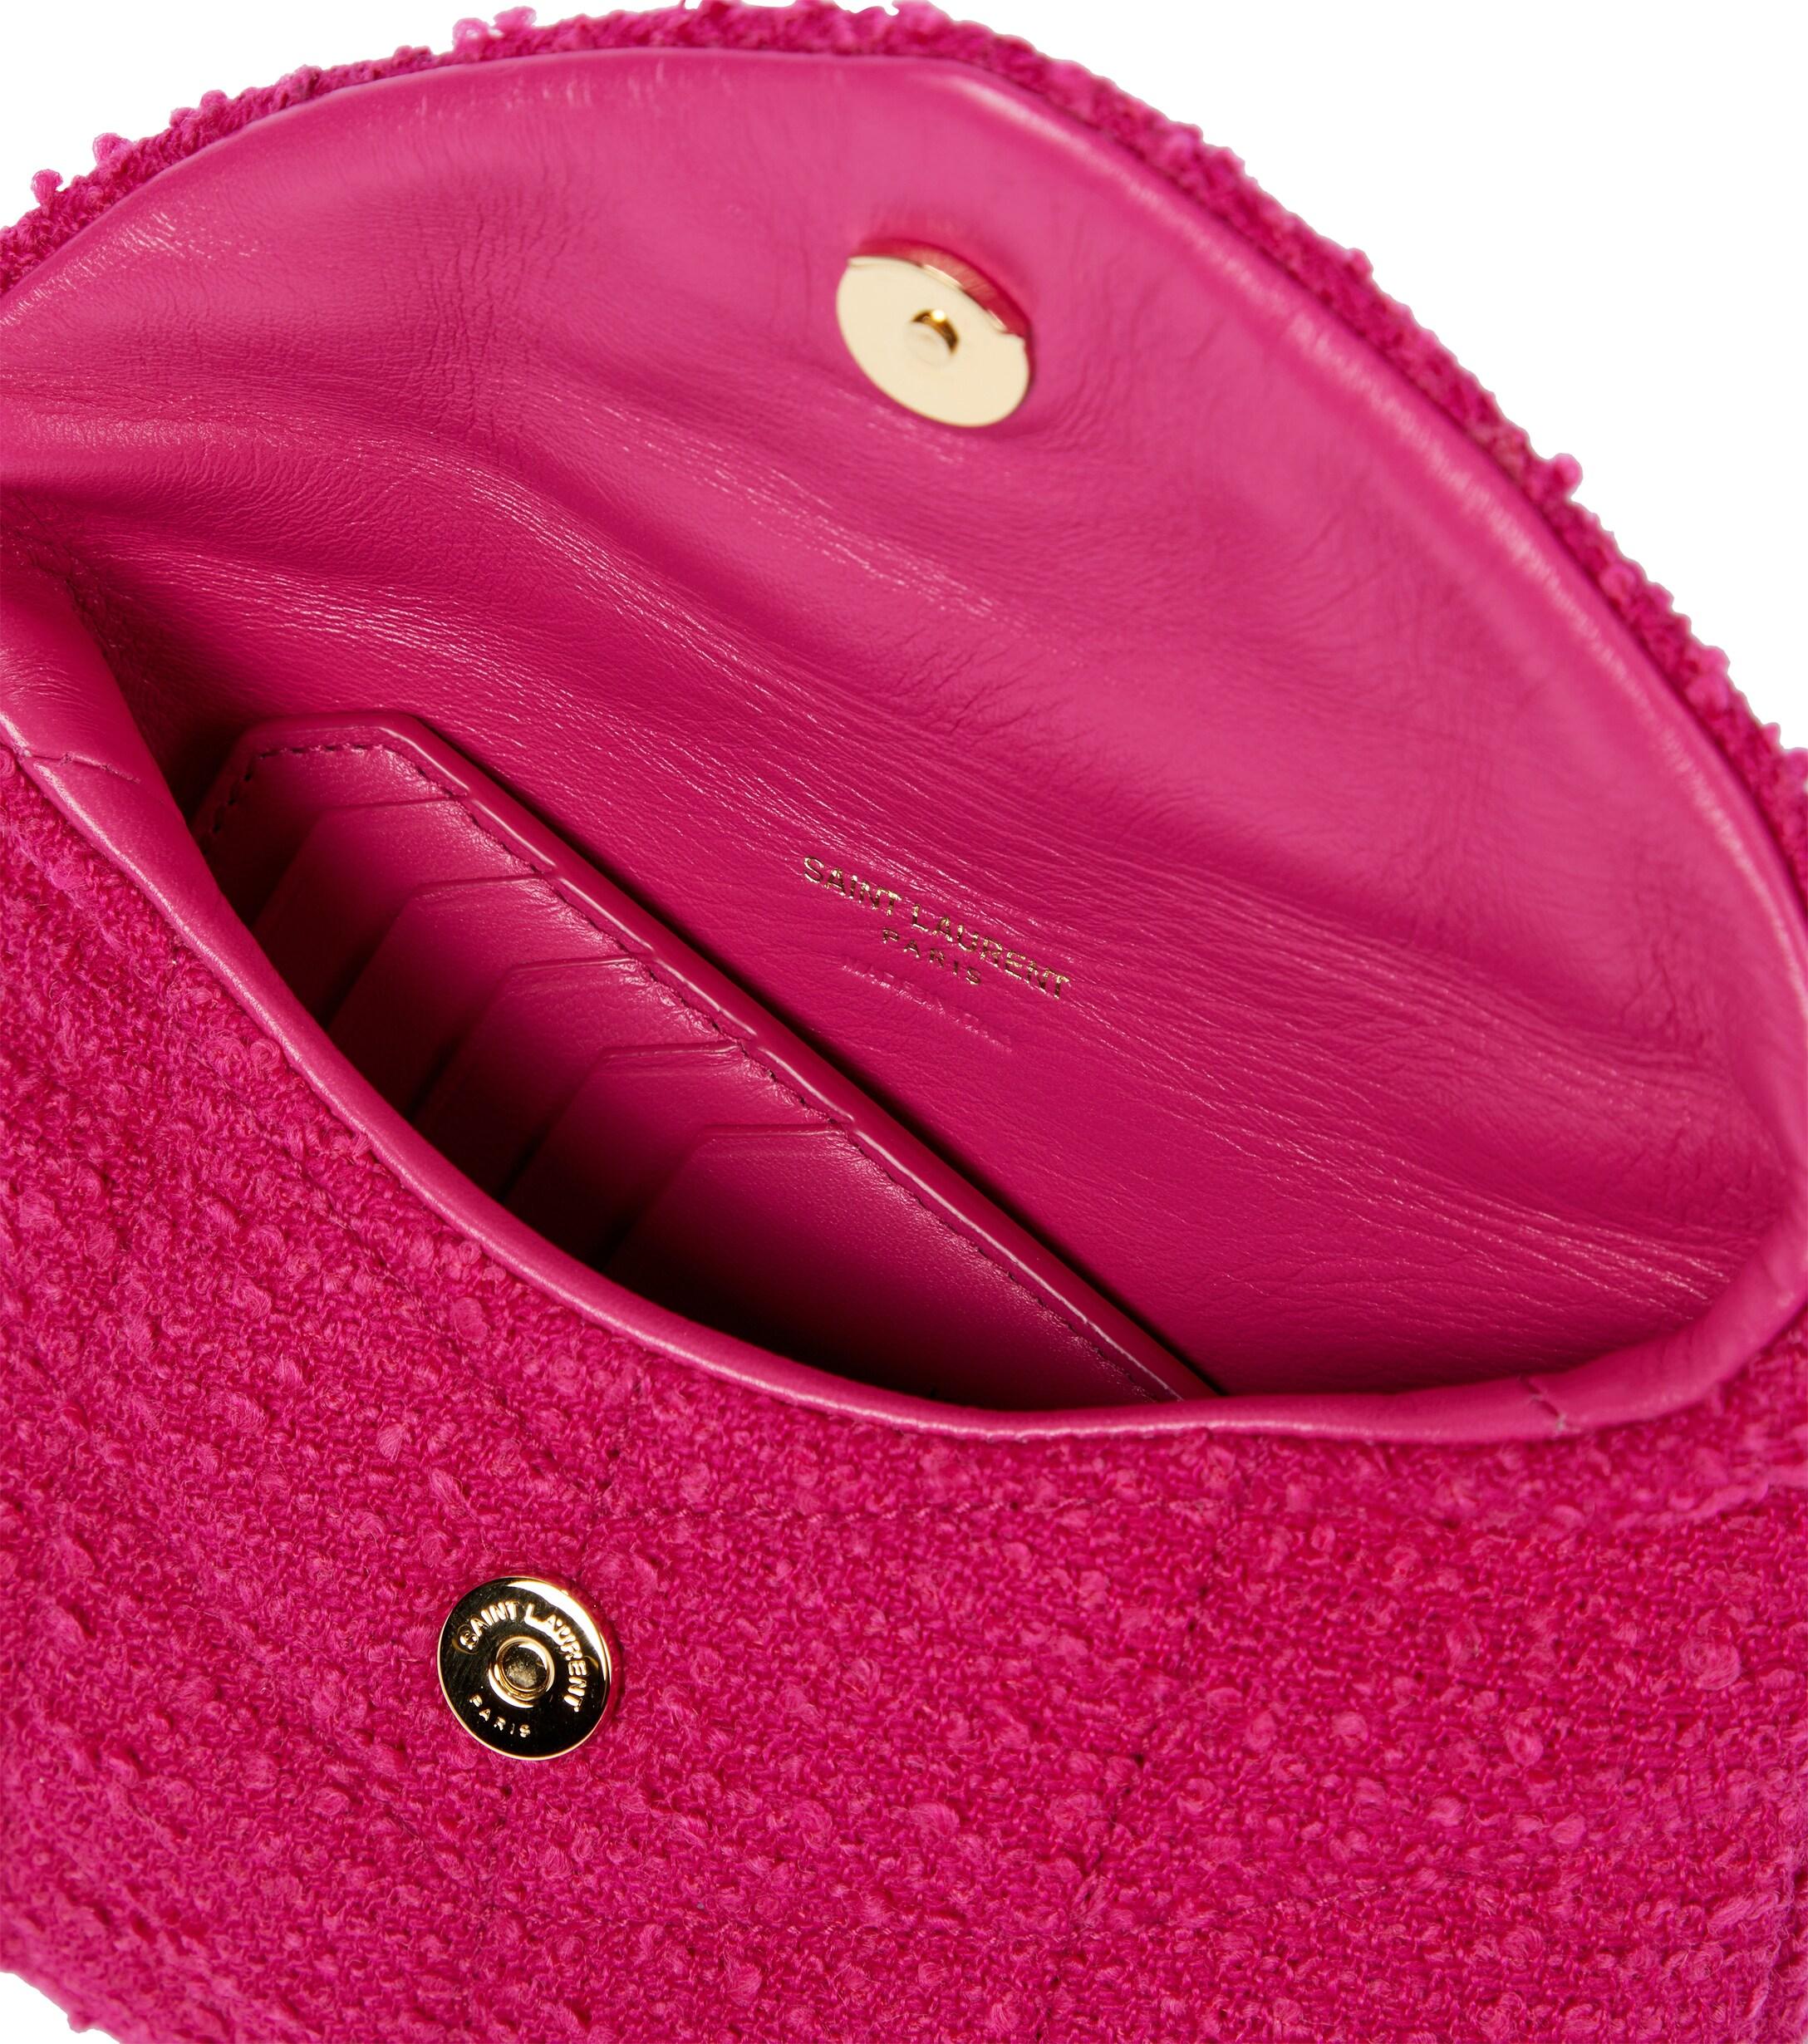 Saint Laurent Loulou Puffer Tweed Clutch in Pink | Lyst